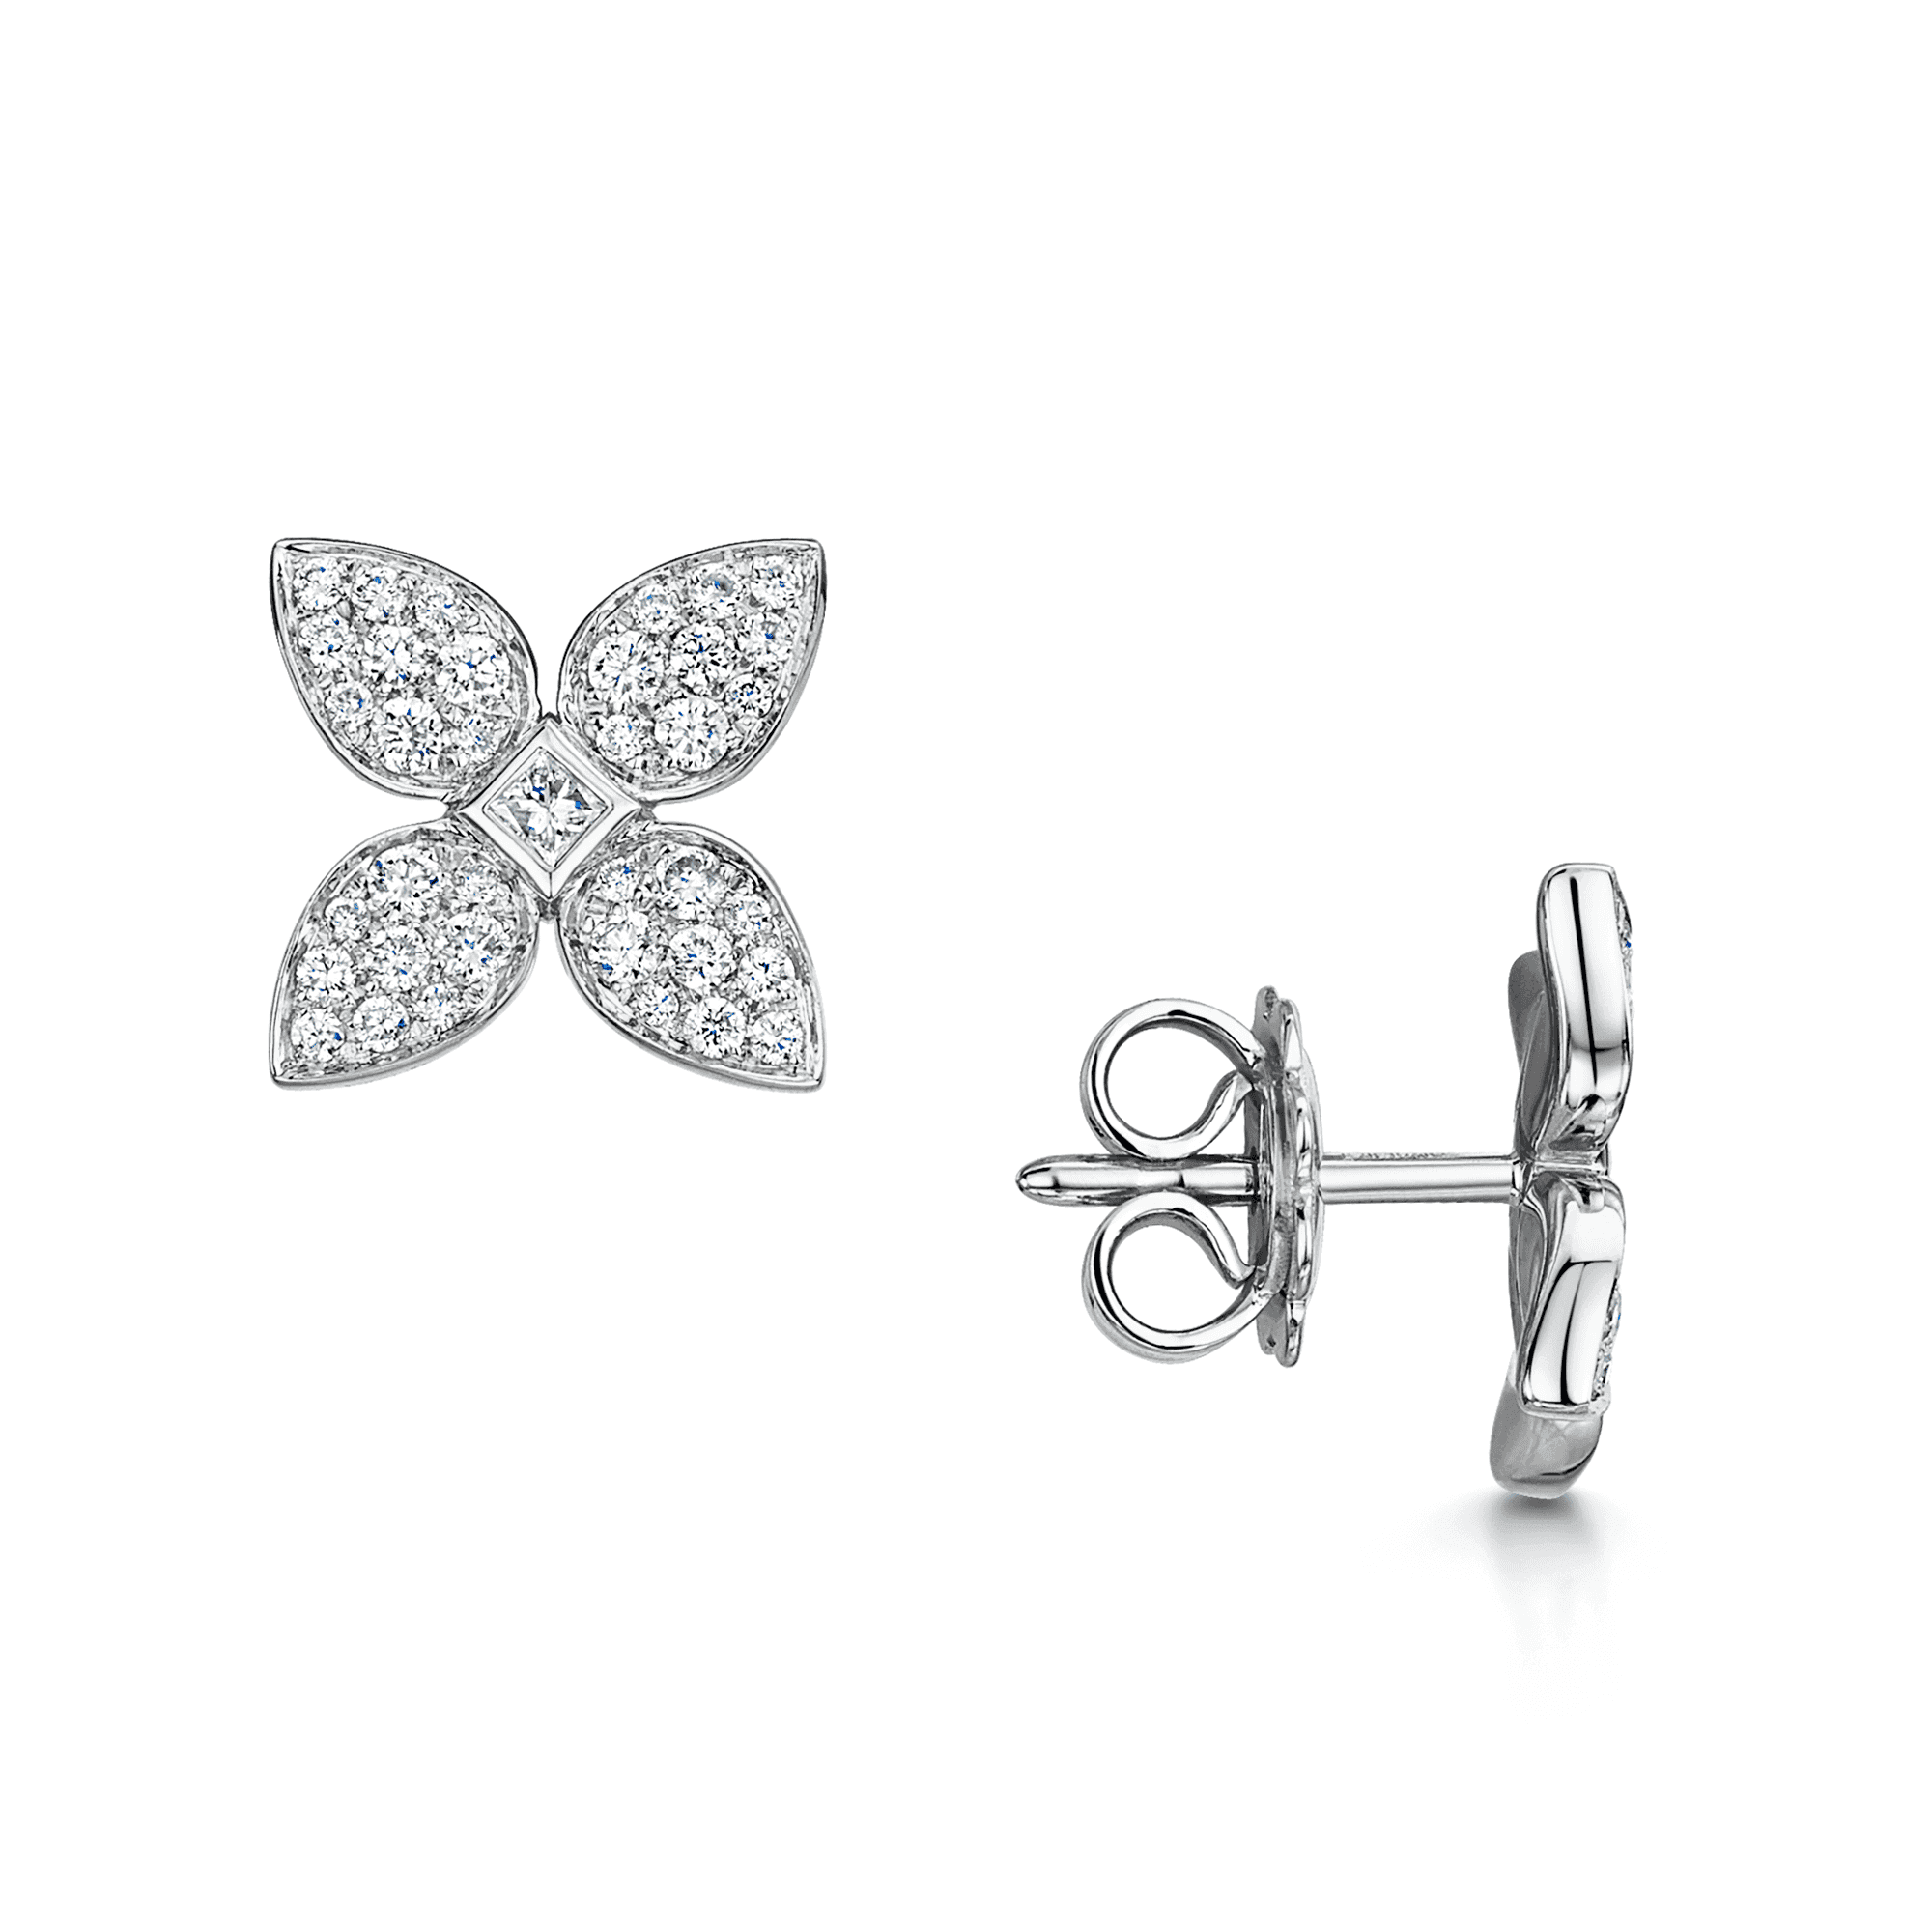 18ct White Gold Flower Stud Earrings With Diamond Pave Set Petals